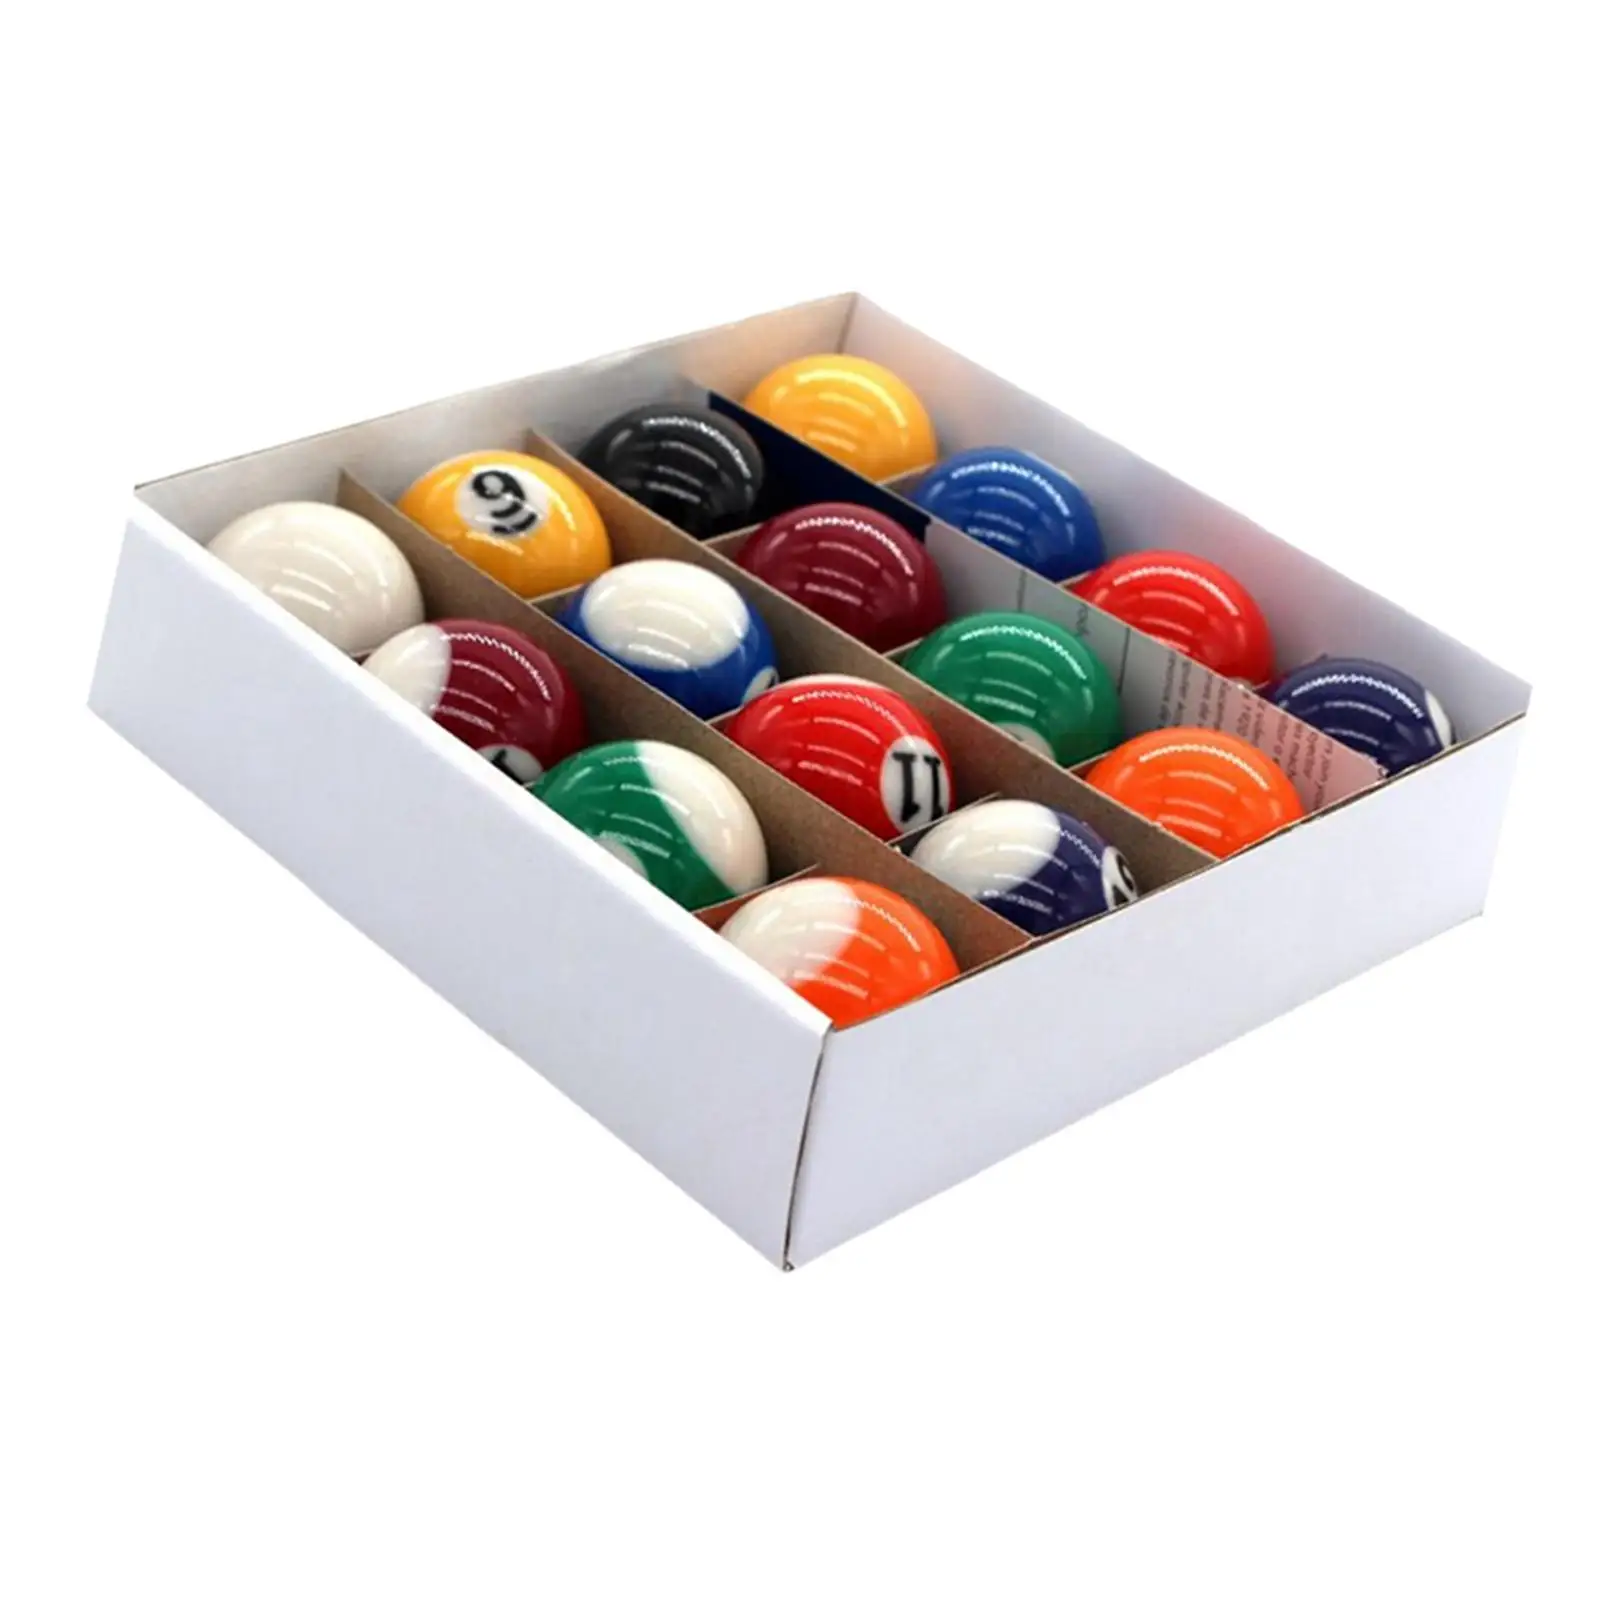 16 Pieces Mini Billiard Balls Set Resin Pool Table Balls Eco Friendly Training Toys for Game Rooms Leisure Sports Accessories